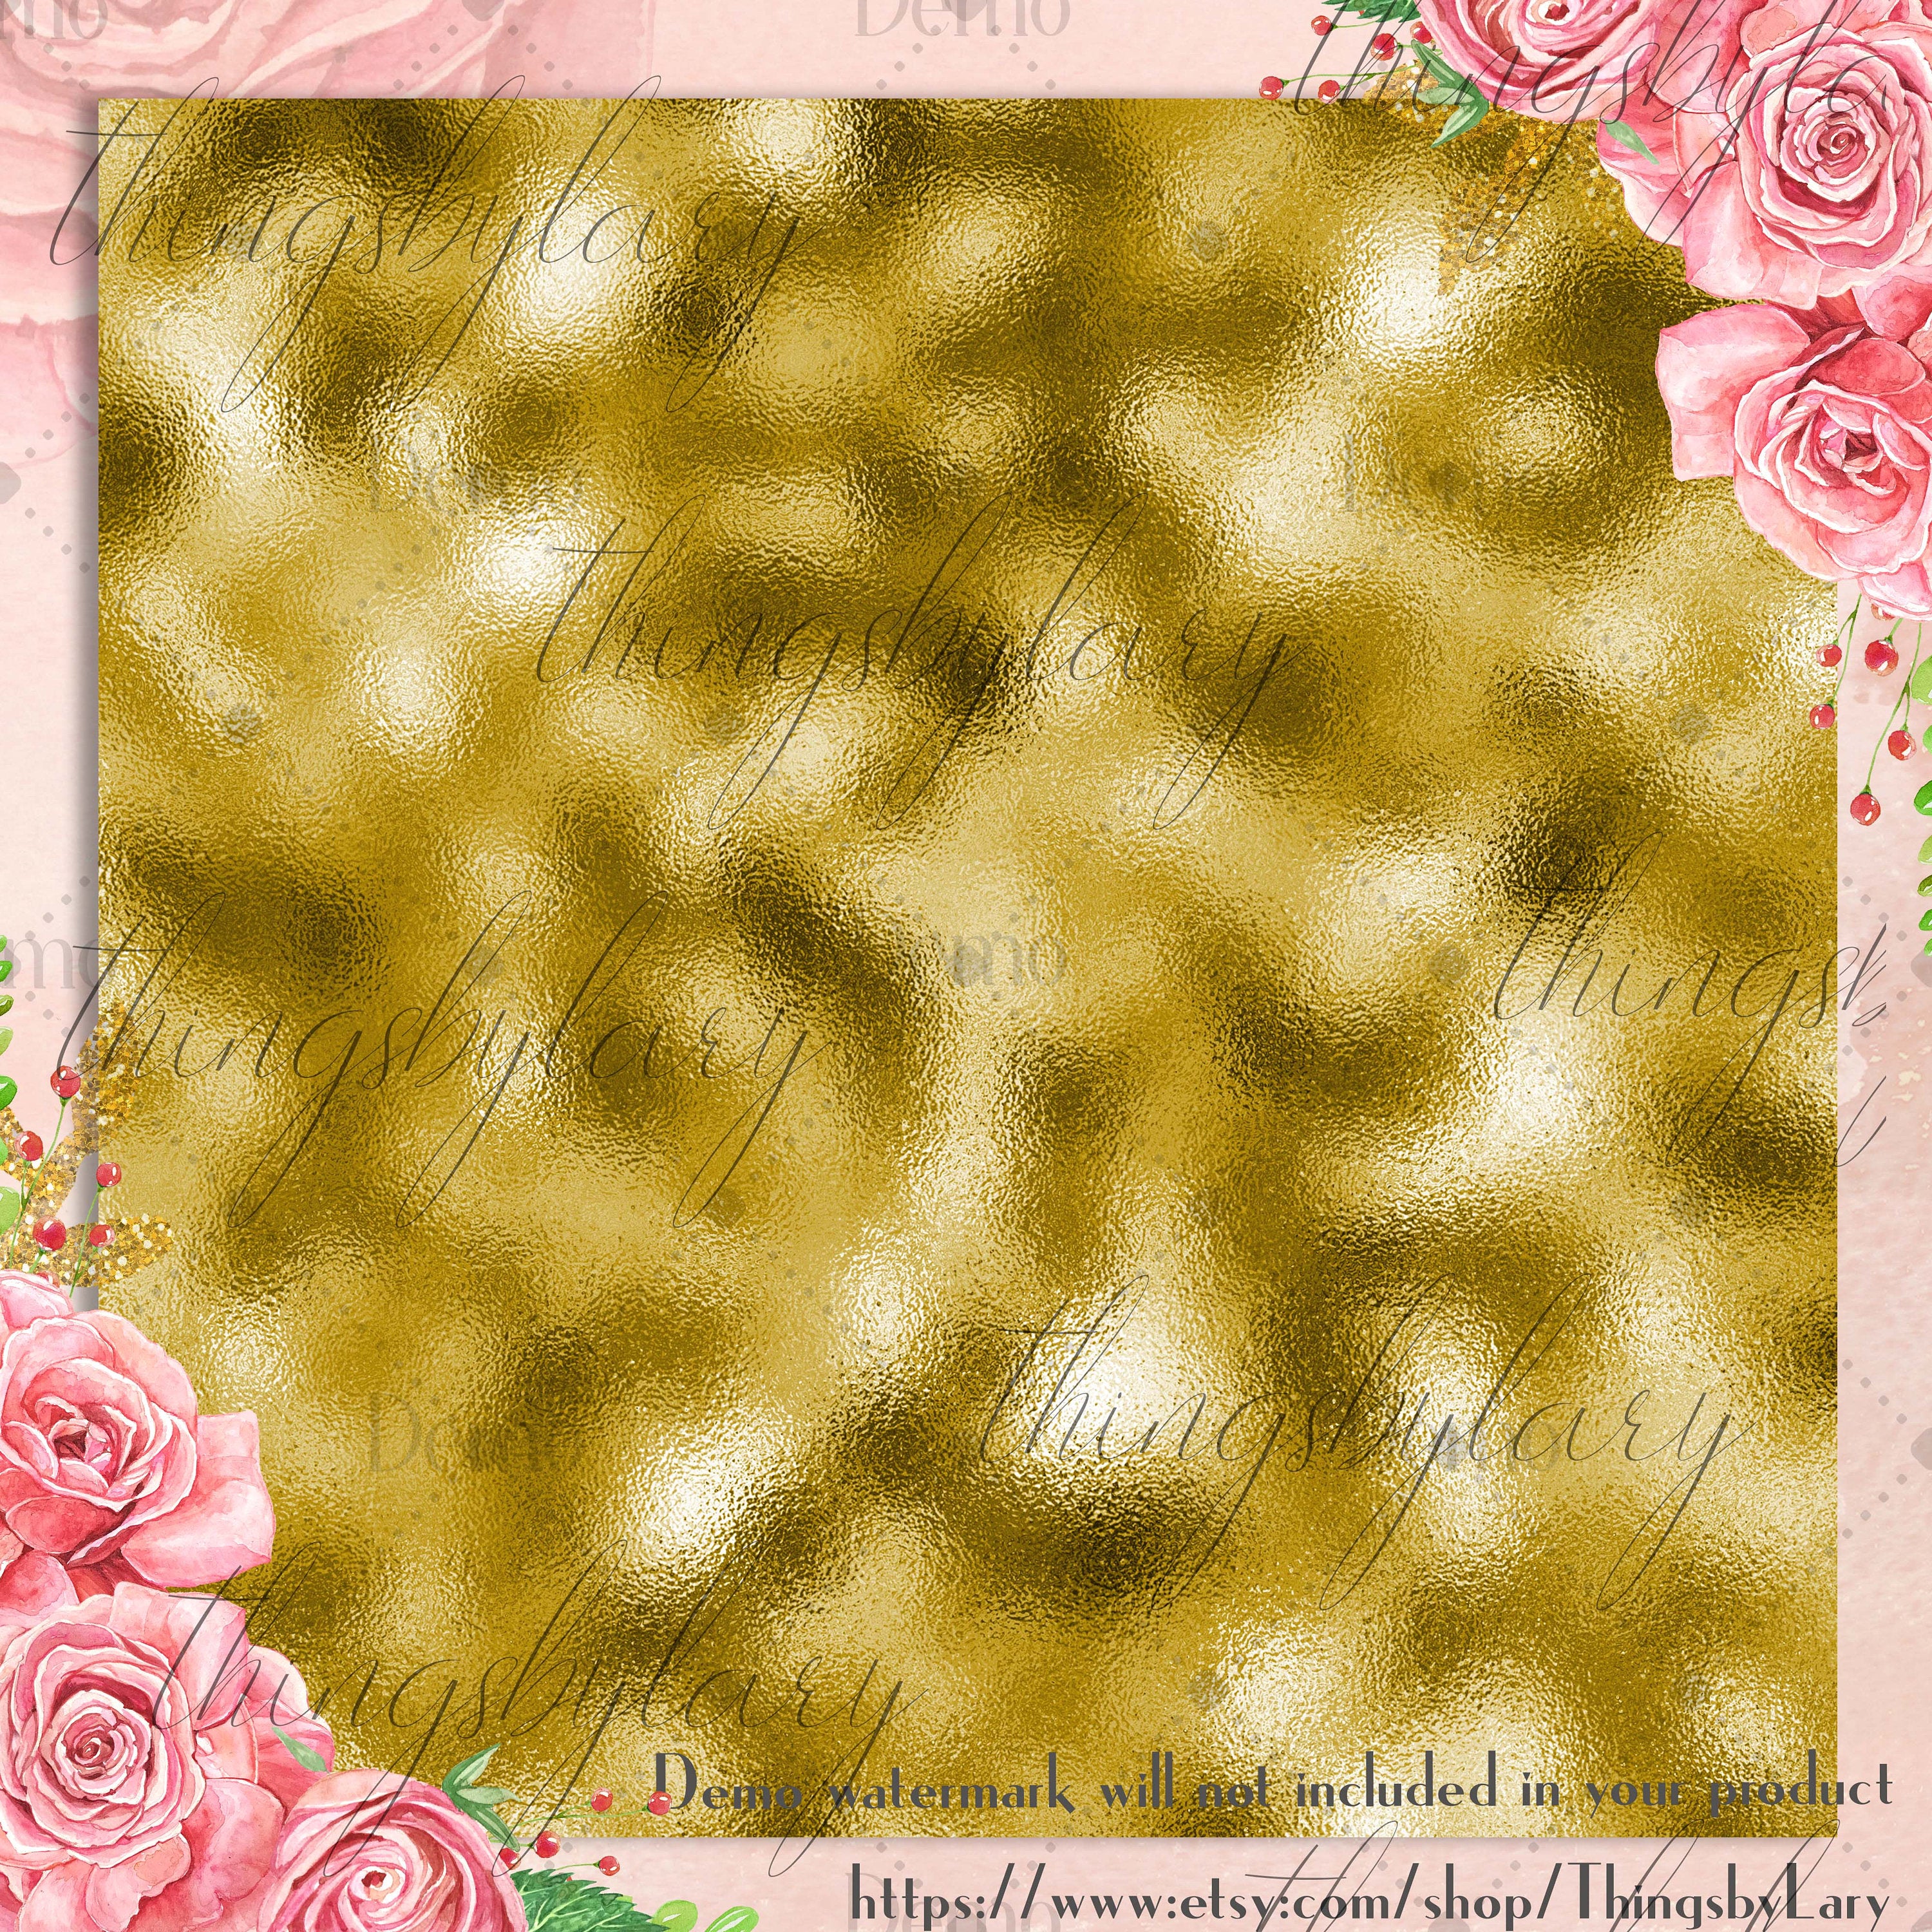 100 Vivid Foil Texture Digital Papers in 12 inch, Instant Download Commercial Use 300 Dpi Planner Paper, luxury foil printing gold silver